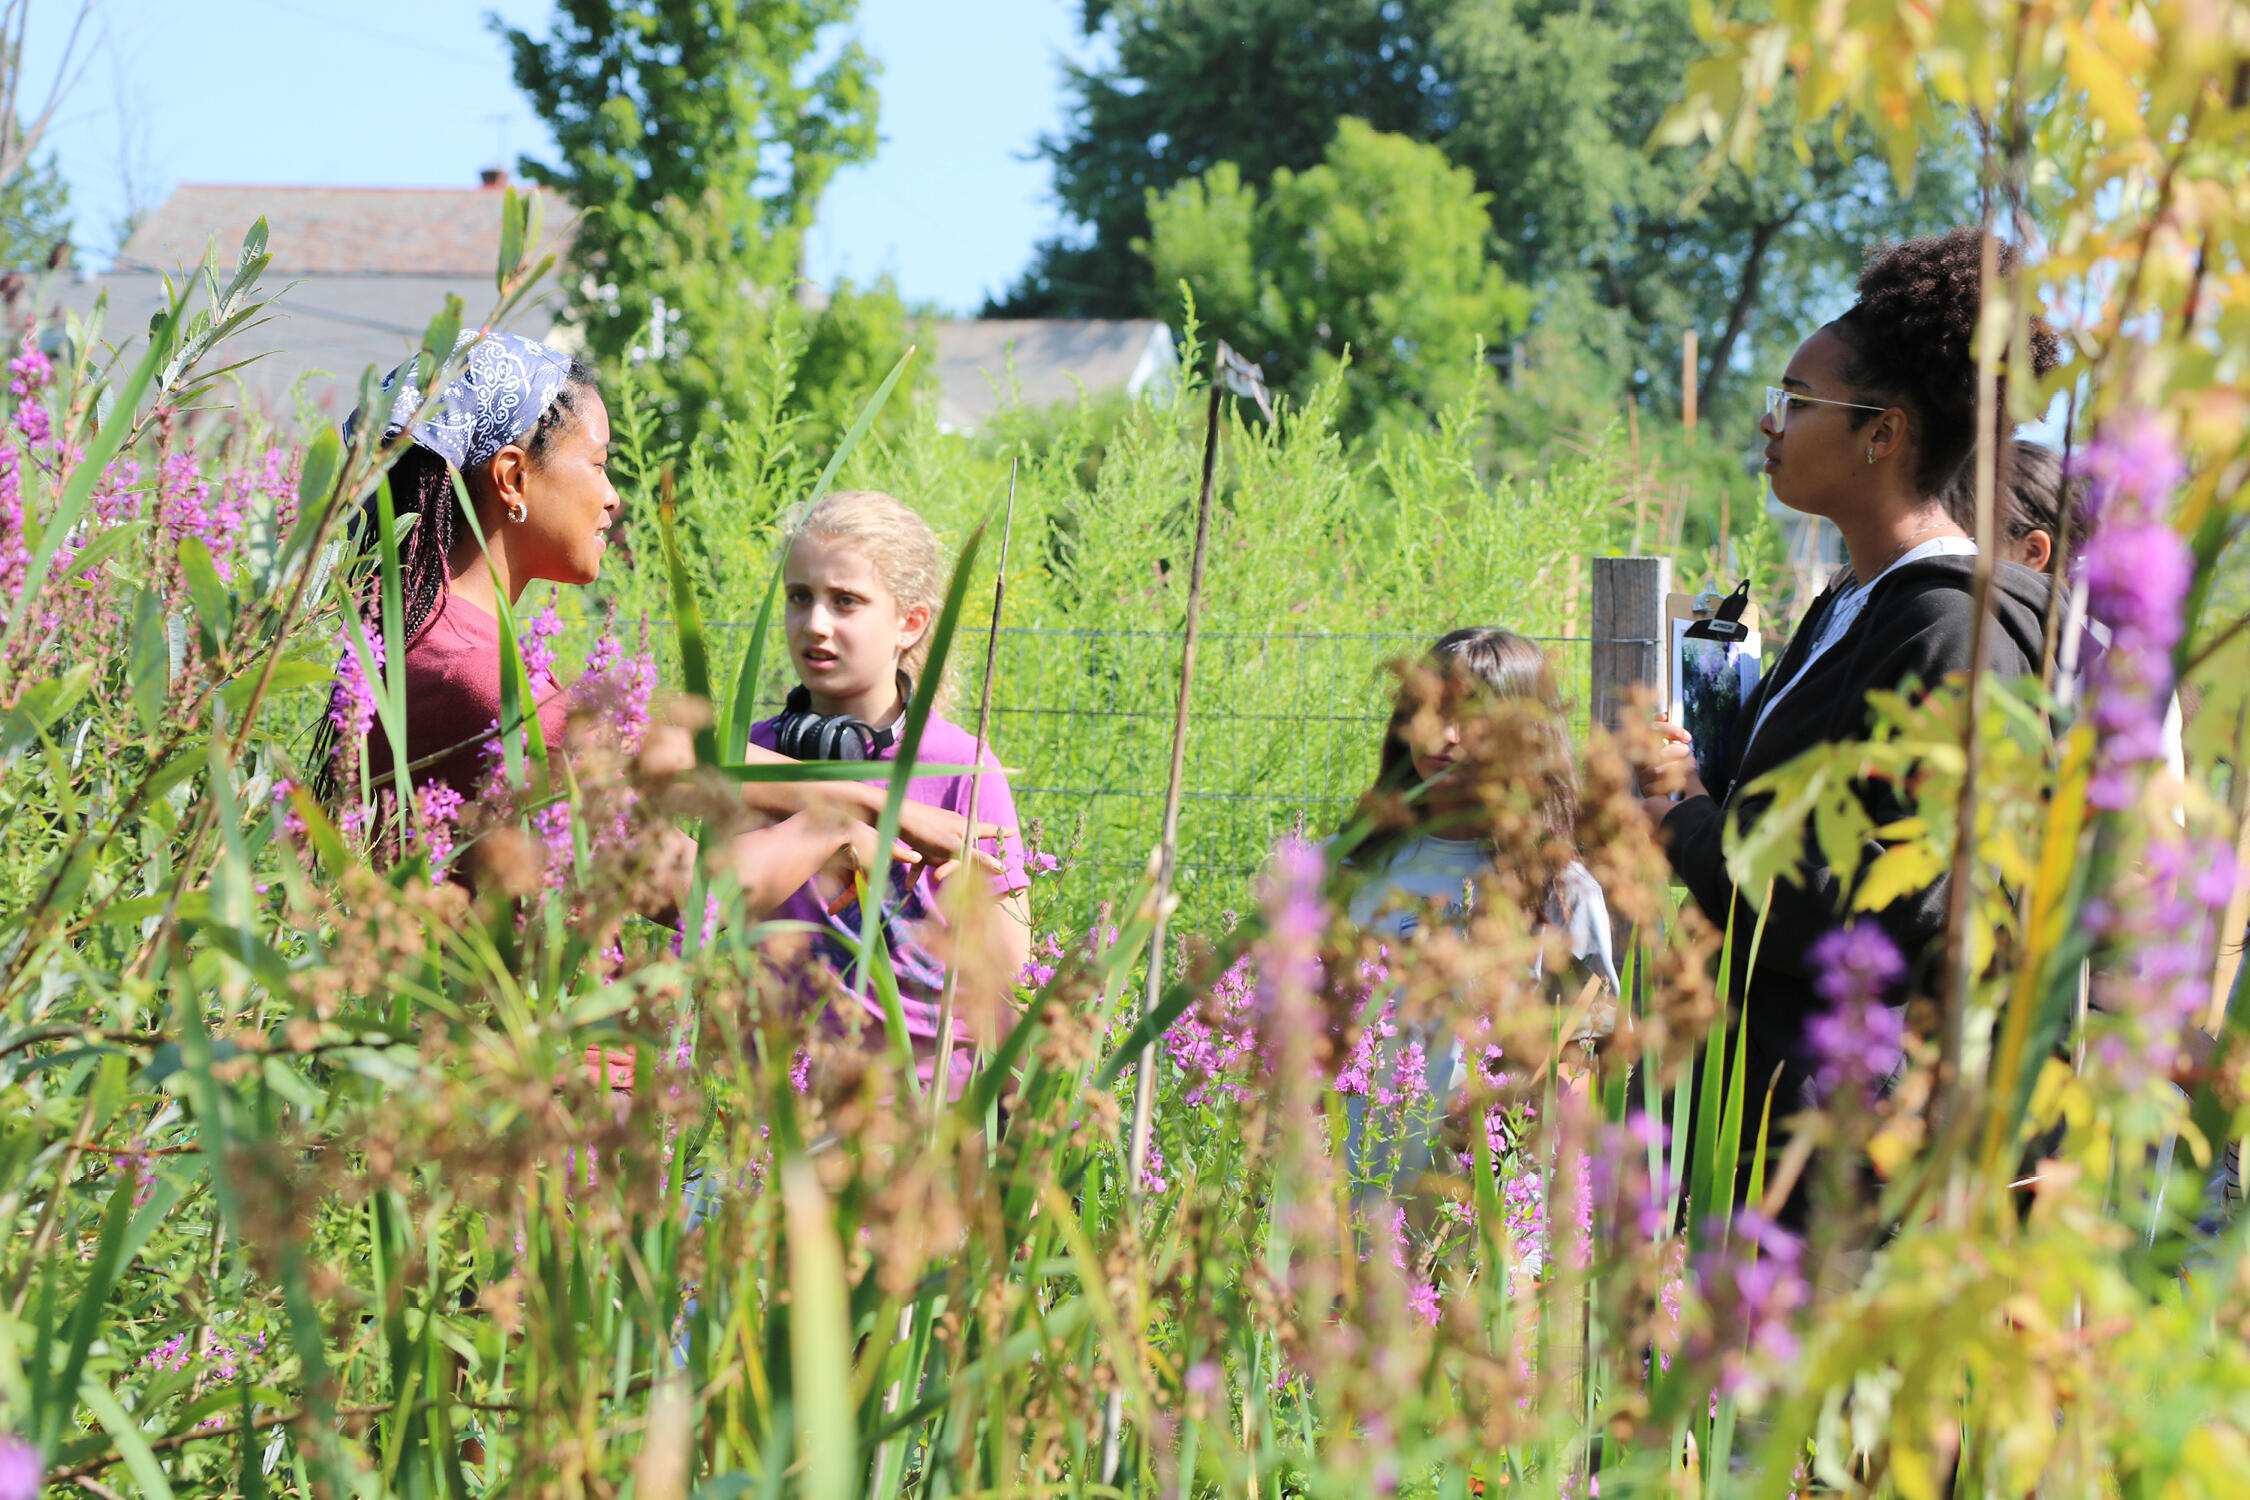 Students and volunteer having a discussion in tall grass